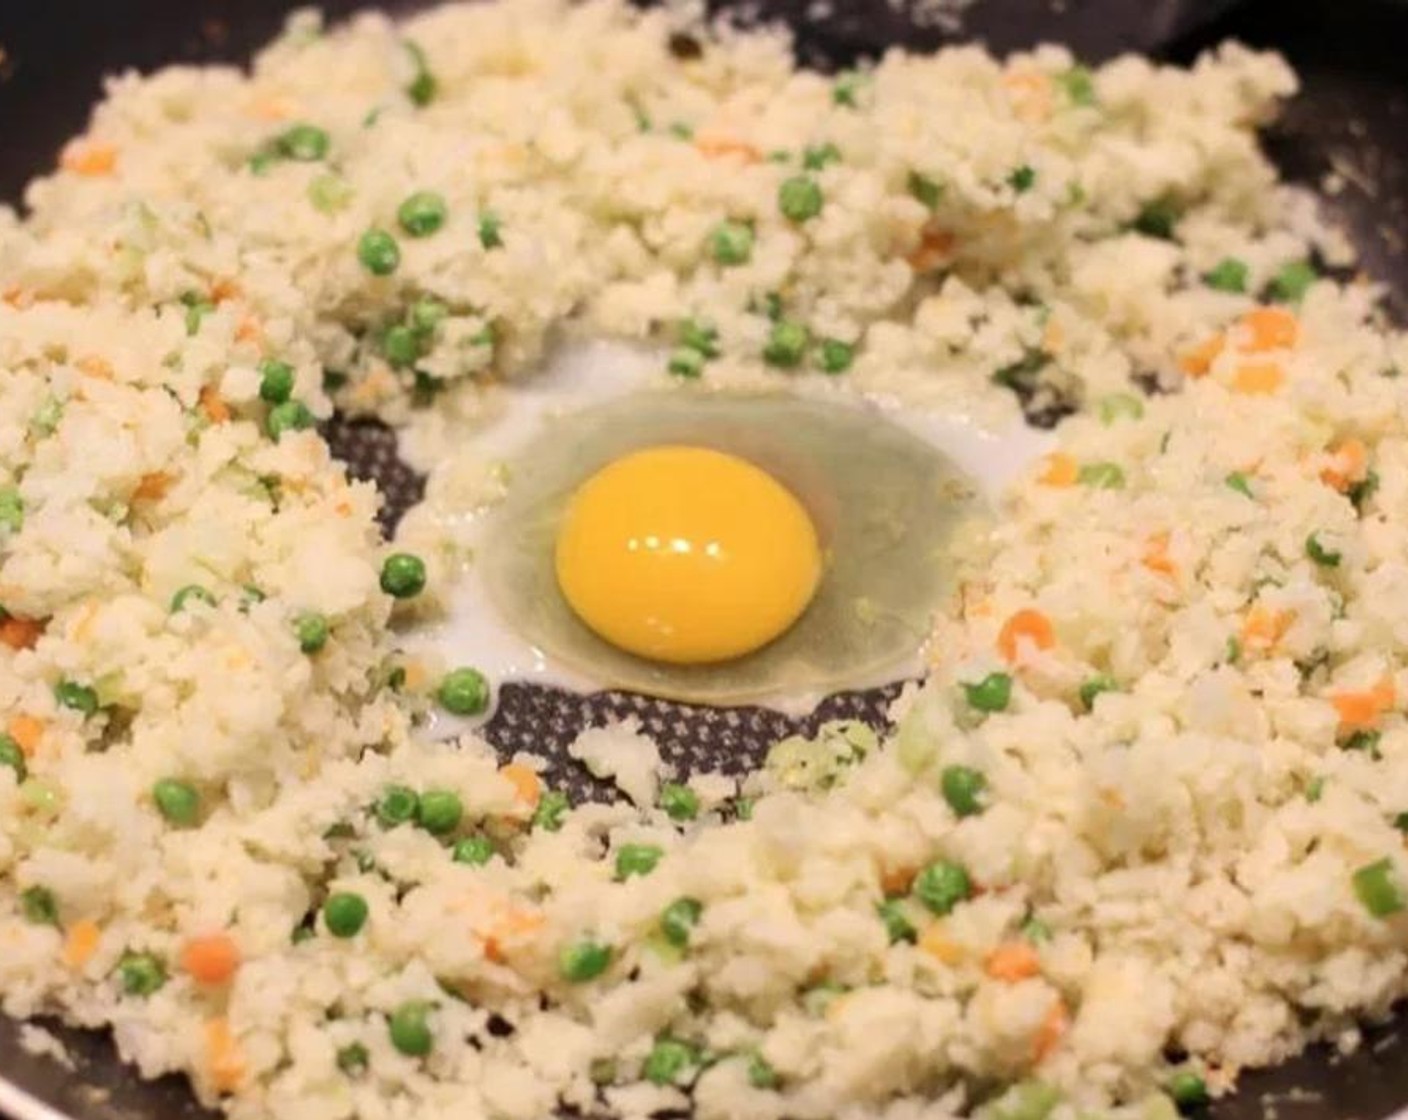 step 5 Create a well in the center of the cauliflower rice and add 1 tsp sesame oil. Crack an Egg (1) in the center and scramble. Once cooked, mix the egg in with the cauliflower rice. Add Salt (to taste), Ground Black Pepper (to taste), and Soy Sauce (3 Tbsp).